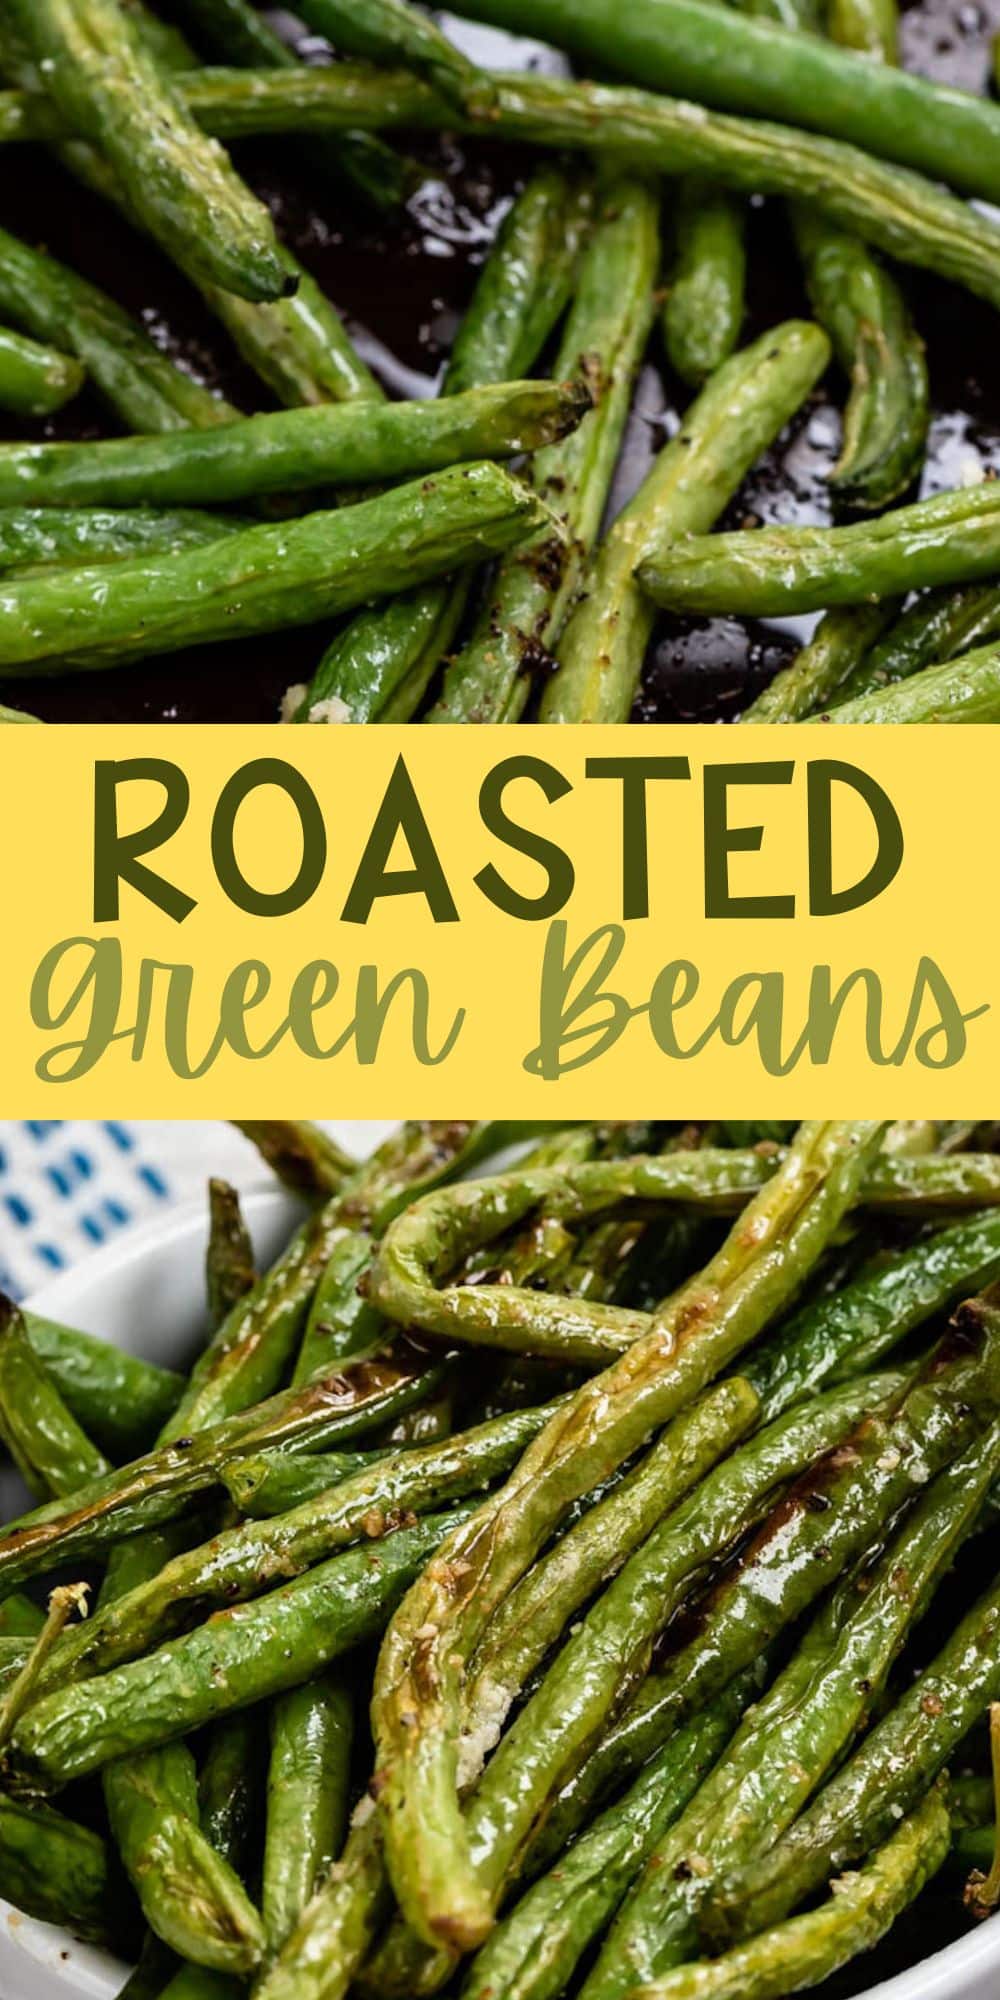 two photos of greens beans piled on each other on a black cooking sheet with words on the image.